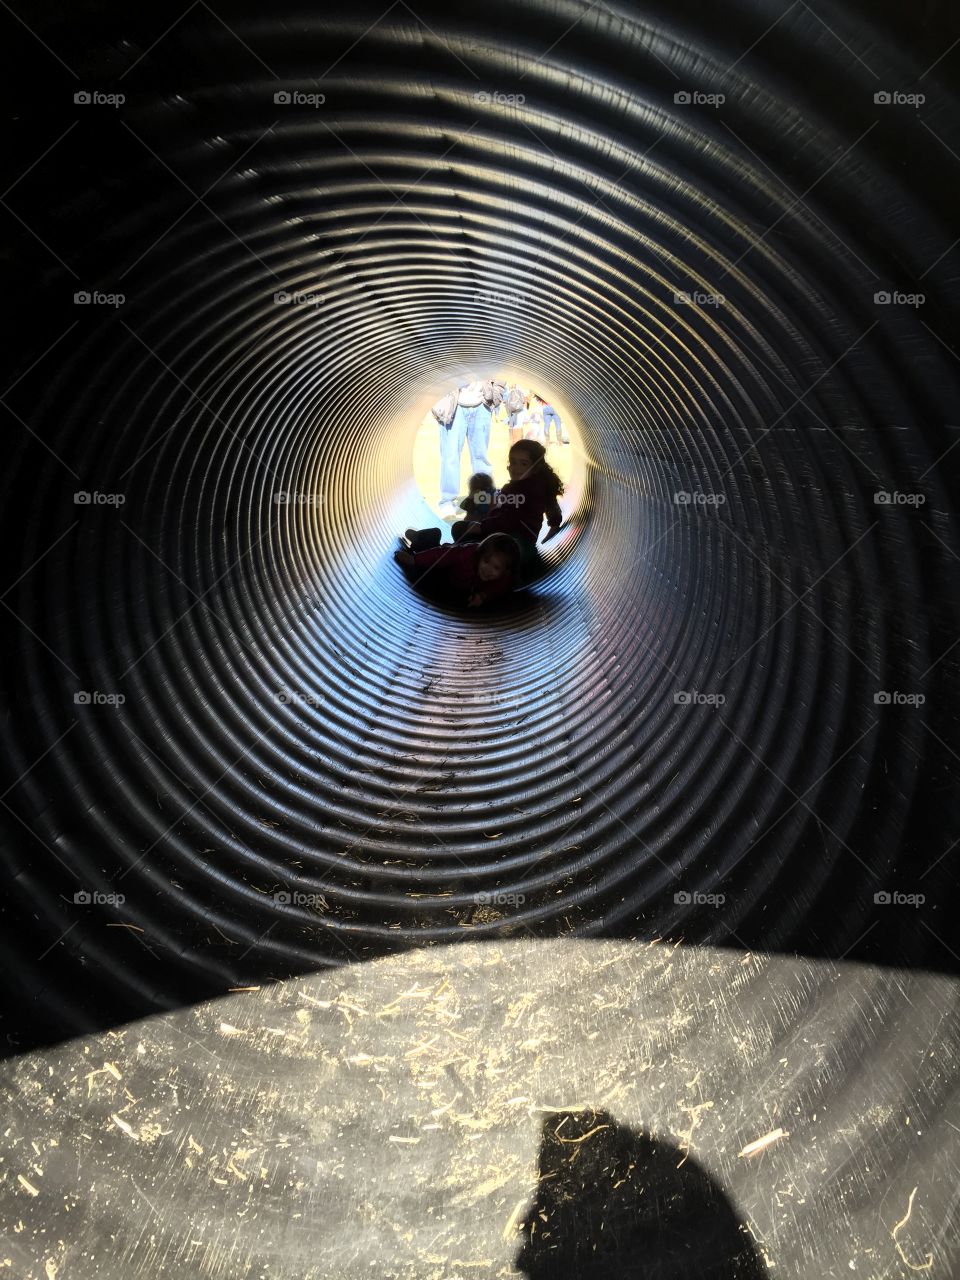 No Person, Tunnel, People, Spider, One